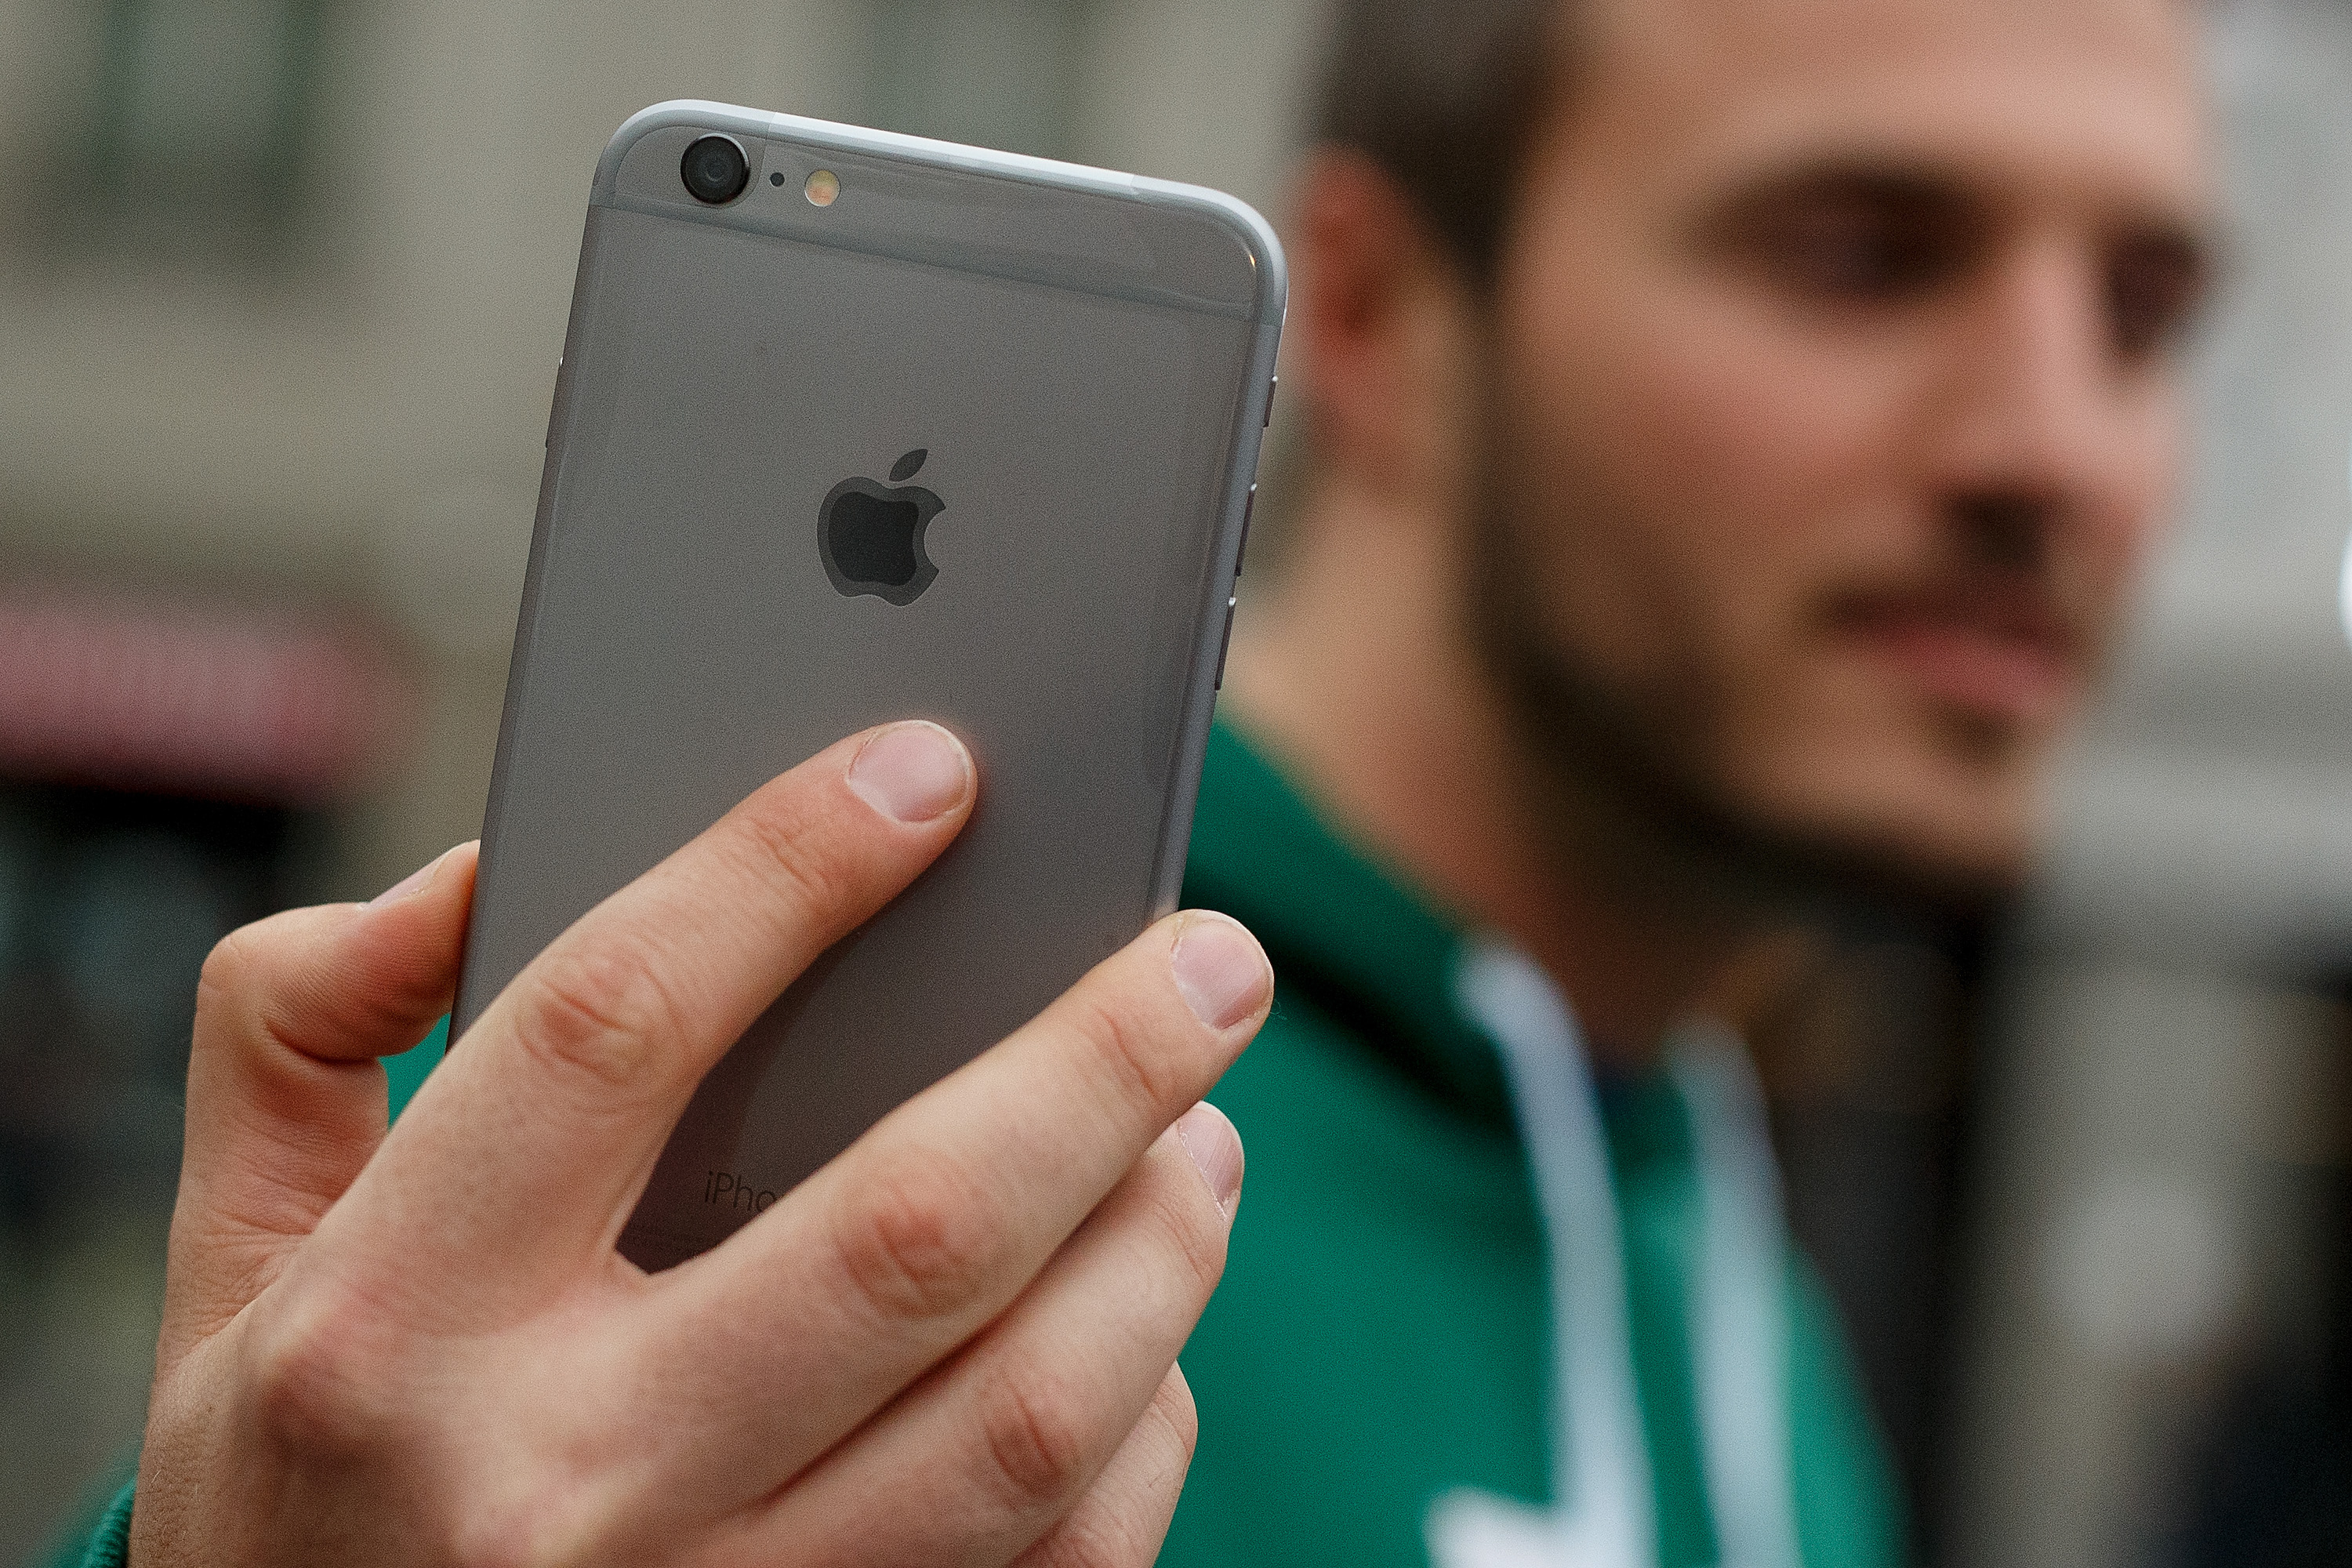 A man shows his new iPhone outside Puerta del Sol Apple Store as Apple launches iPhone 6 and iPhone 6 Plus on September 26, 2014 in Madrid, Spain. (Pablo Blazquez Dominguez—Getty Images)